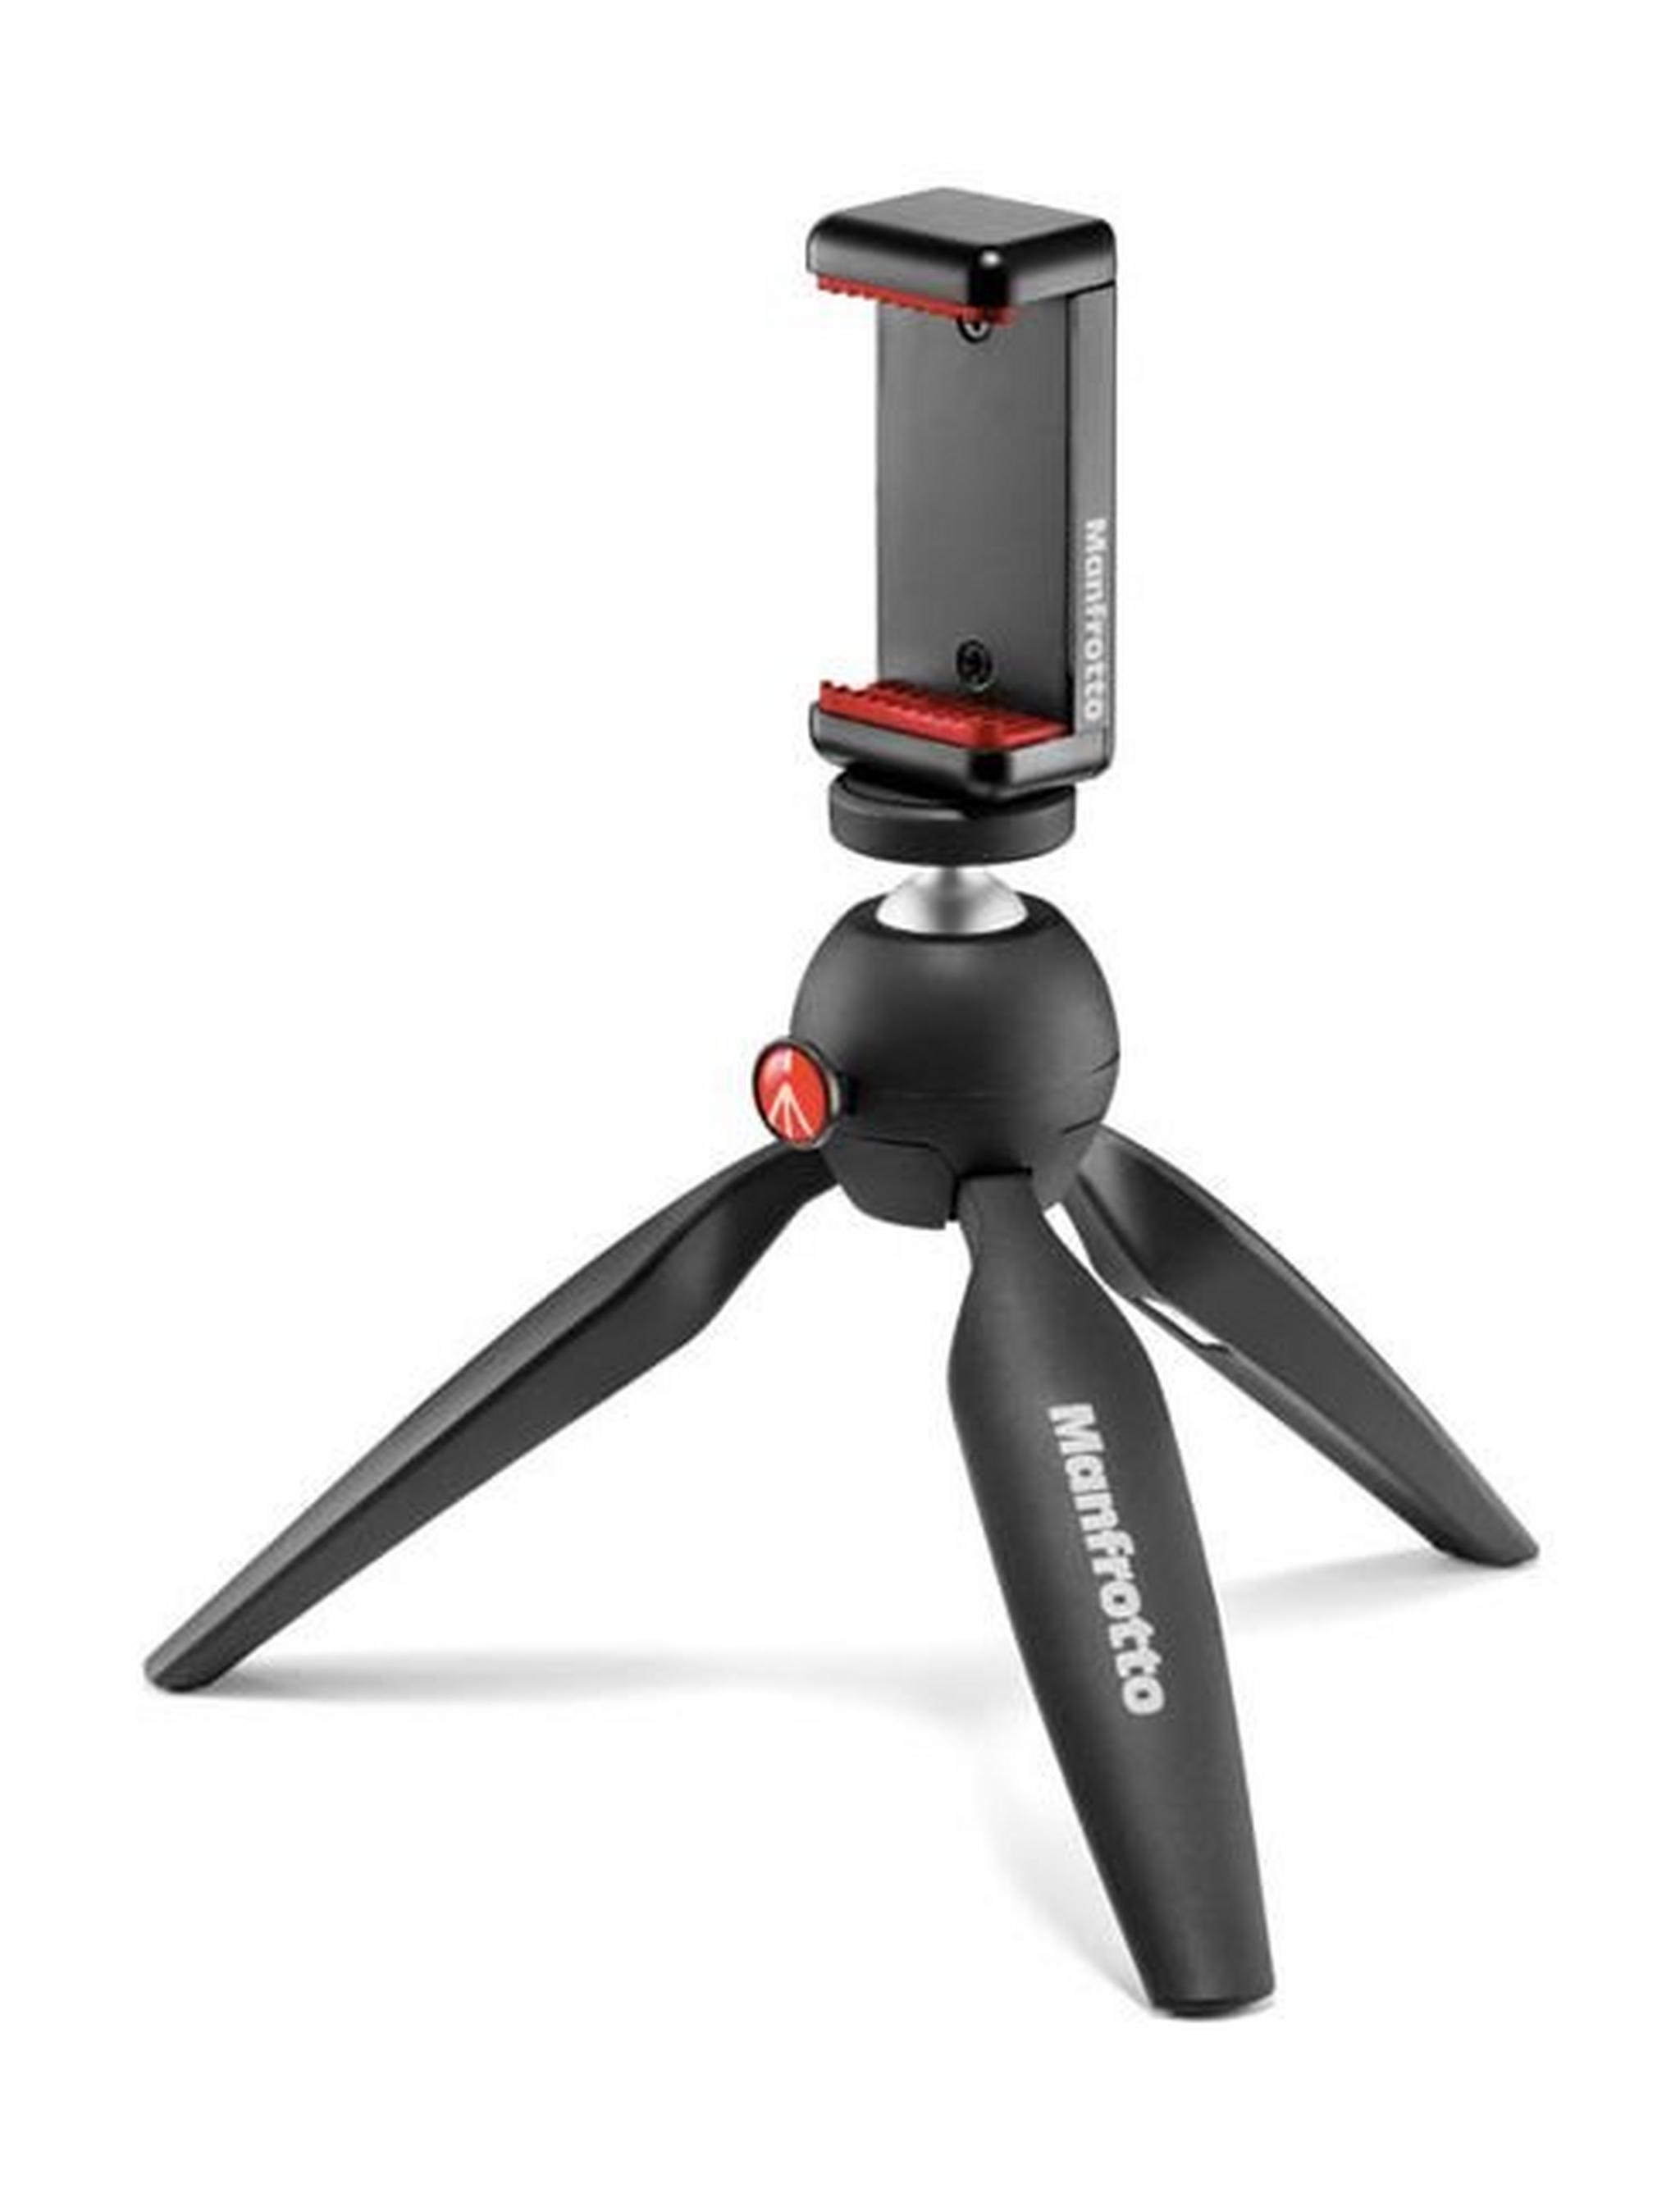 Manfrotto PIXI Mini Table Top Tripod With Universal Smartphone Clamp